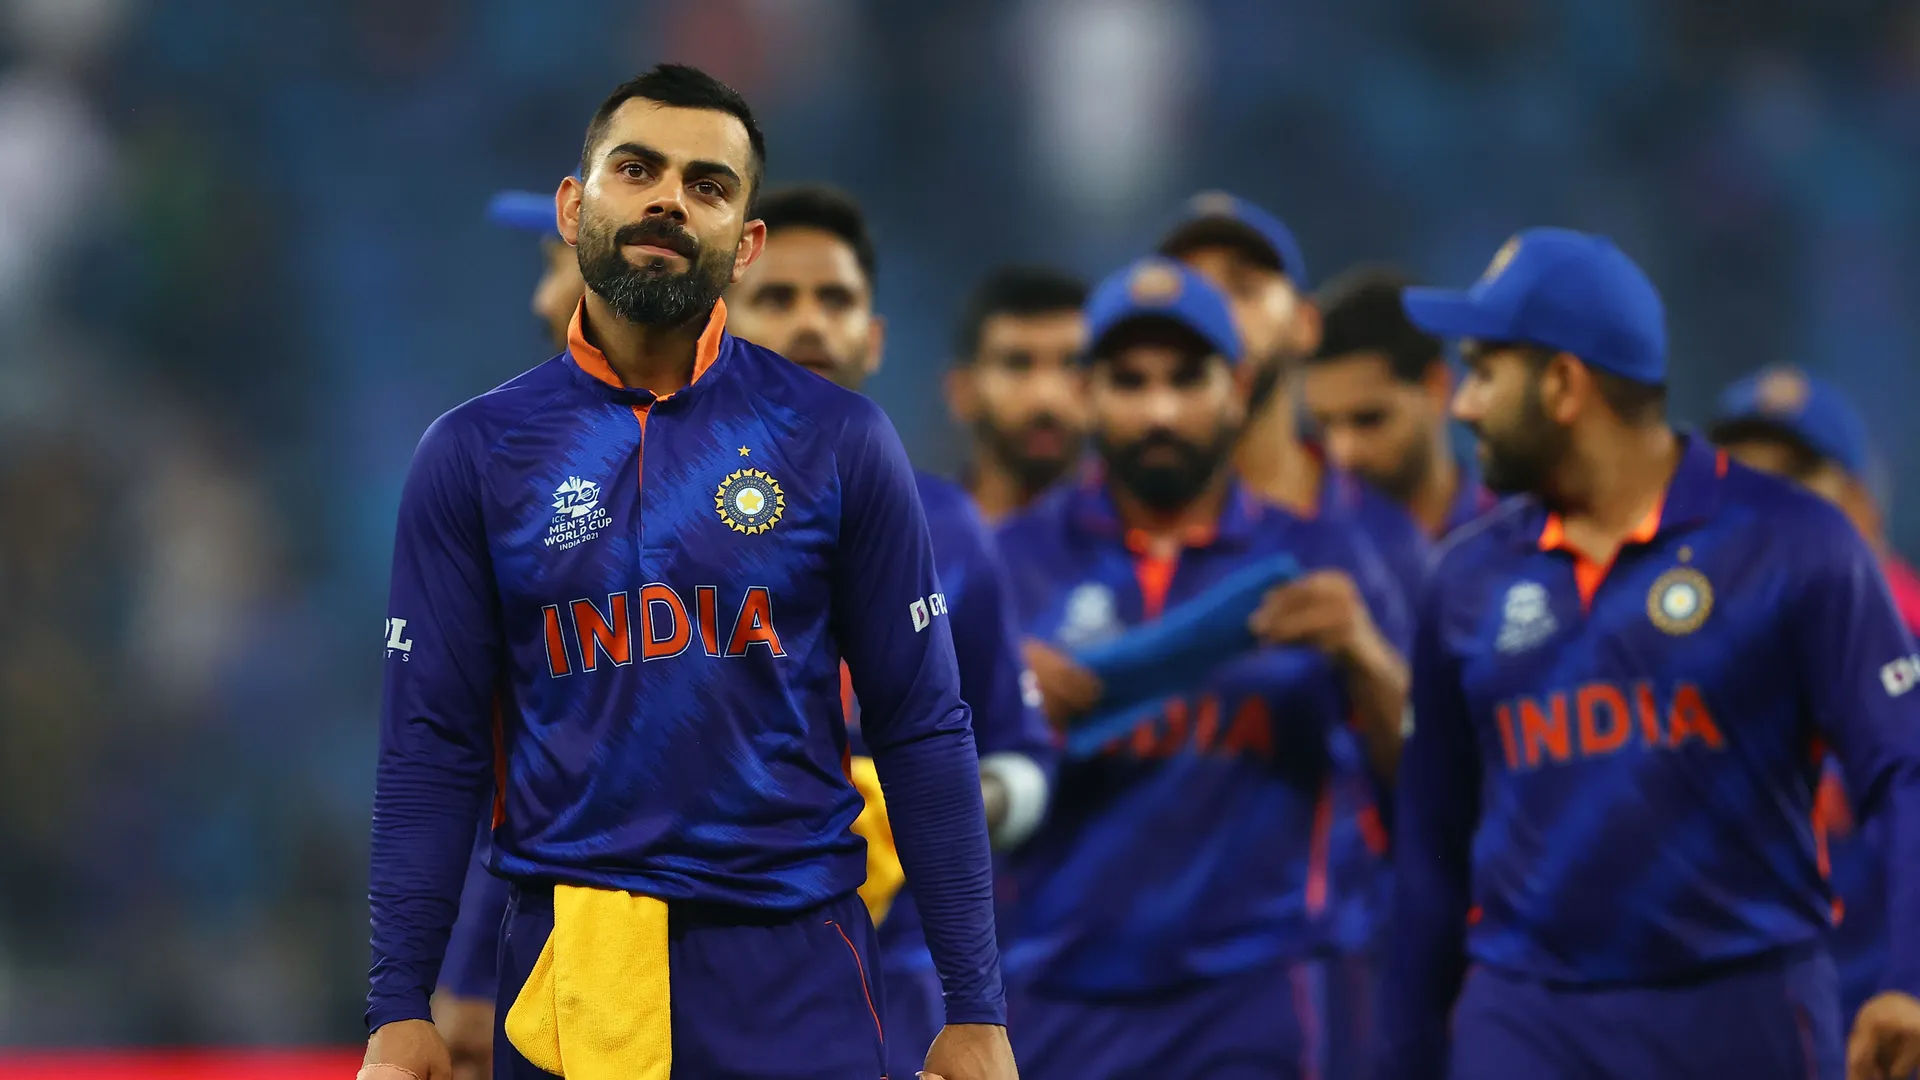 Ahead of India vs Pakistan Asia Cup 2022 ties, Virat Kohli opens up on his ‘never give up’ attitude